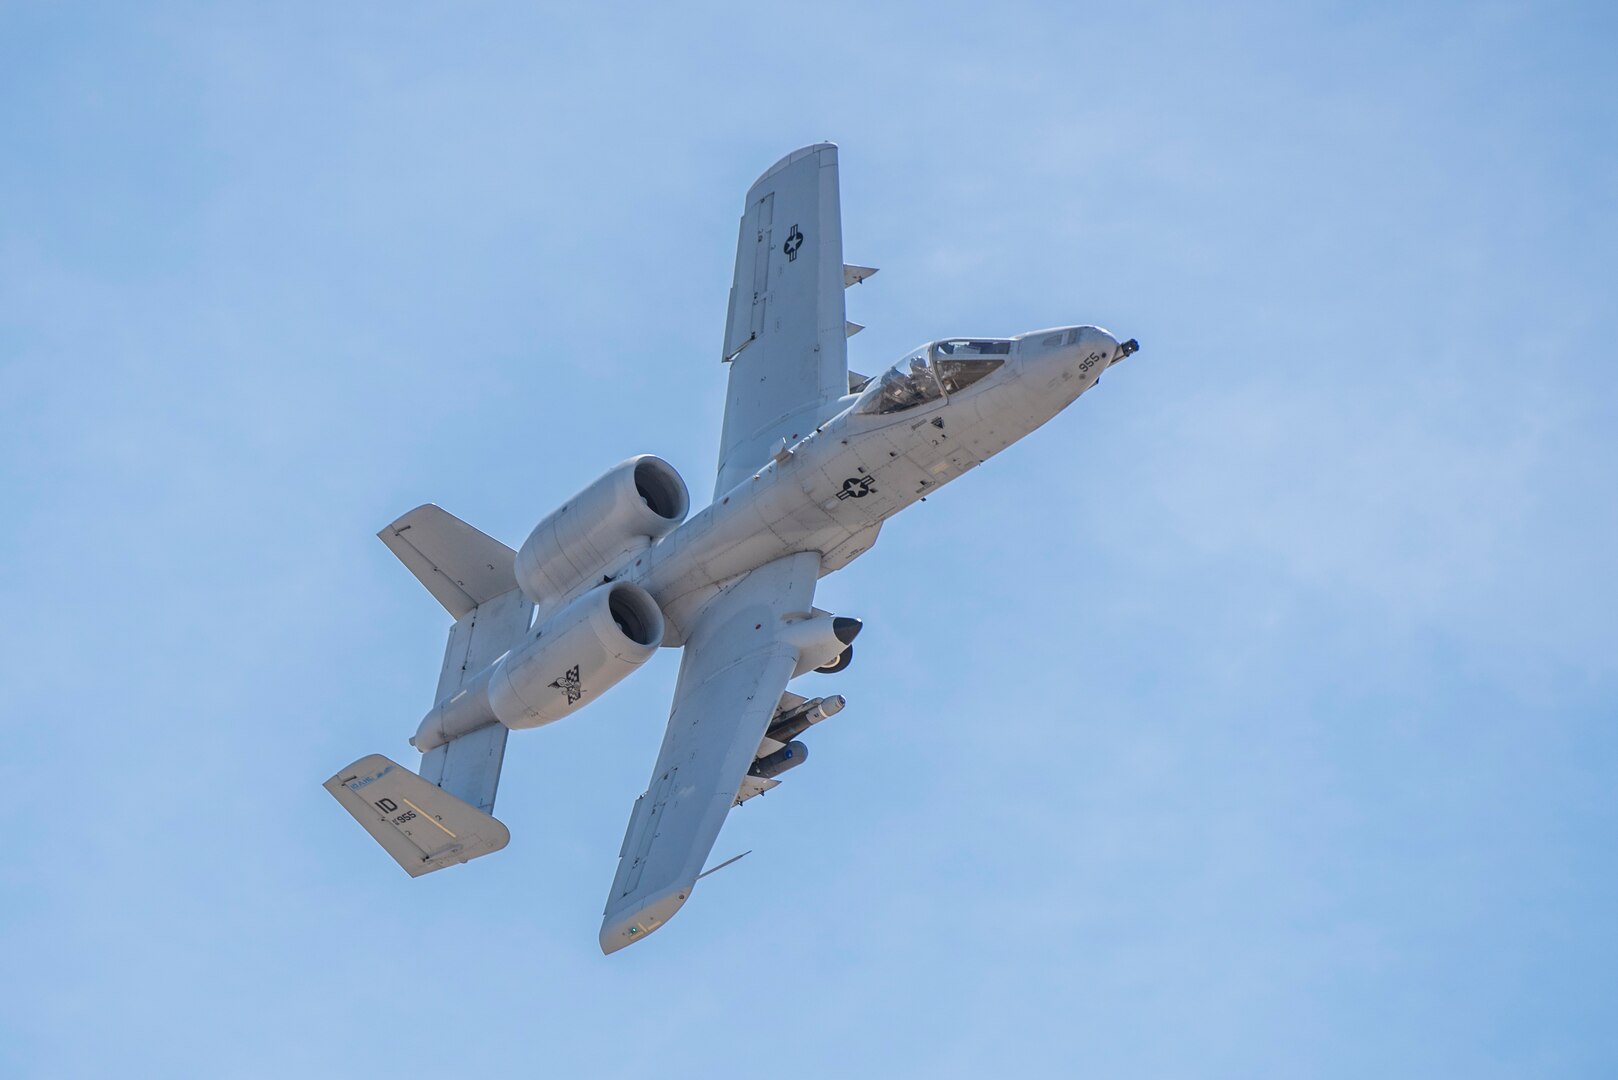 The Idaho Army National Guard’s 2nd of the 116th Combined Arms Battalion and the Idaho Air National Guard’s 124th Air Support Operations Squadron and 190th Fighter Squadron joined forces from the ground to the sky in the large-scale joint training event on May 18 and 19, 2021.